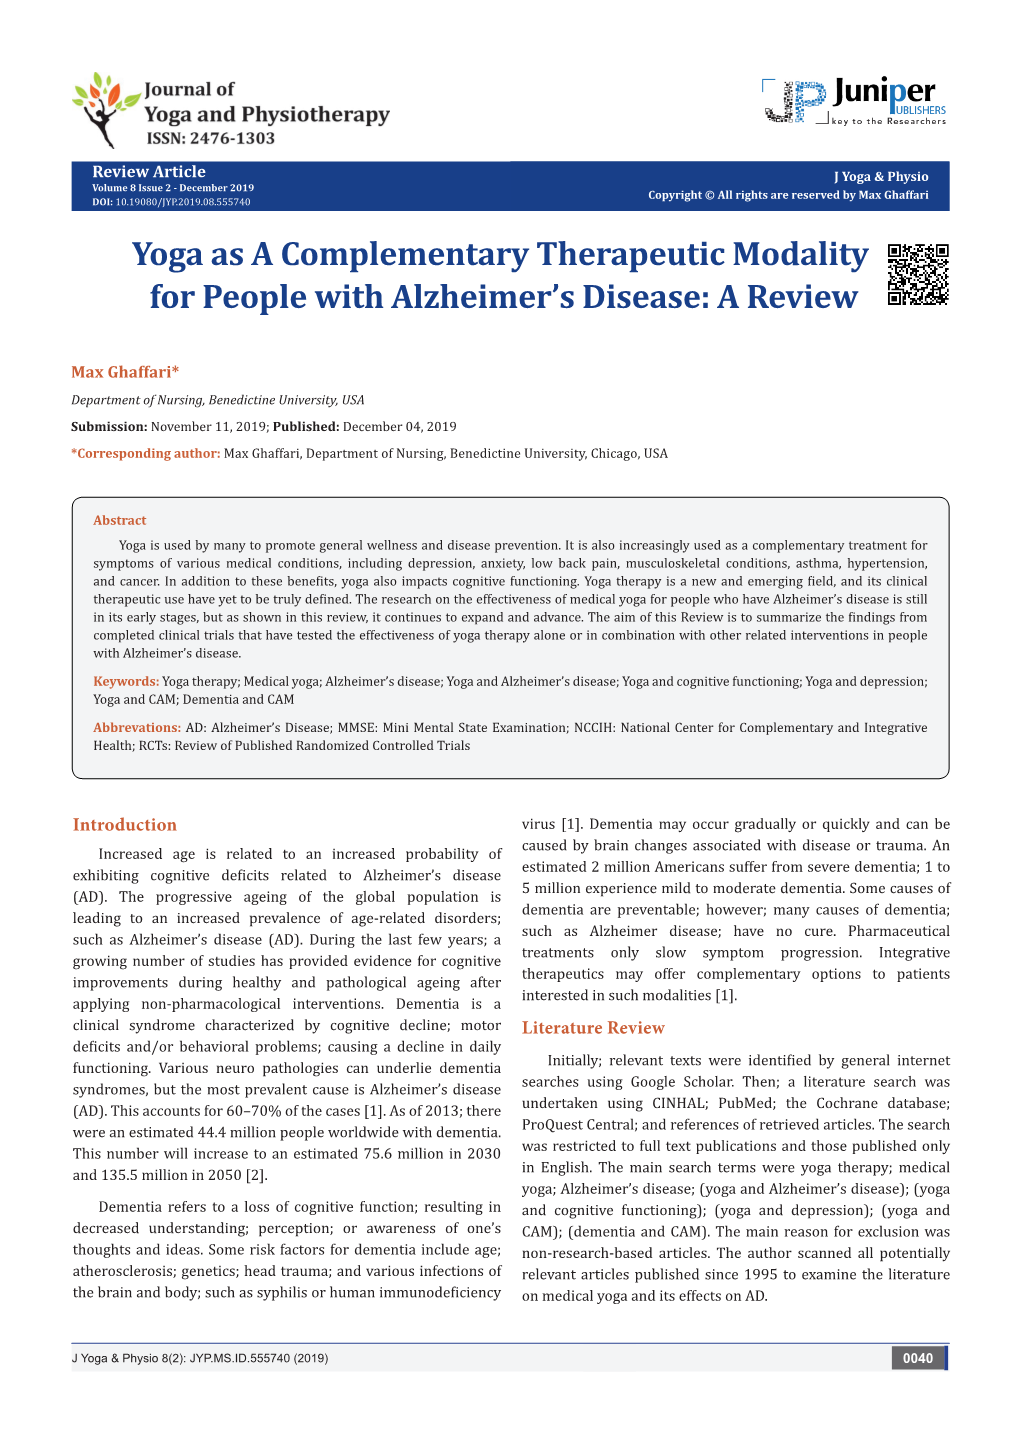 Yoga As a Complementary Therapeutic Modality for People with Alzheimer's Disease